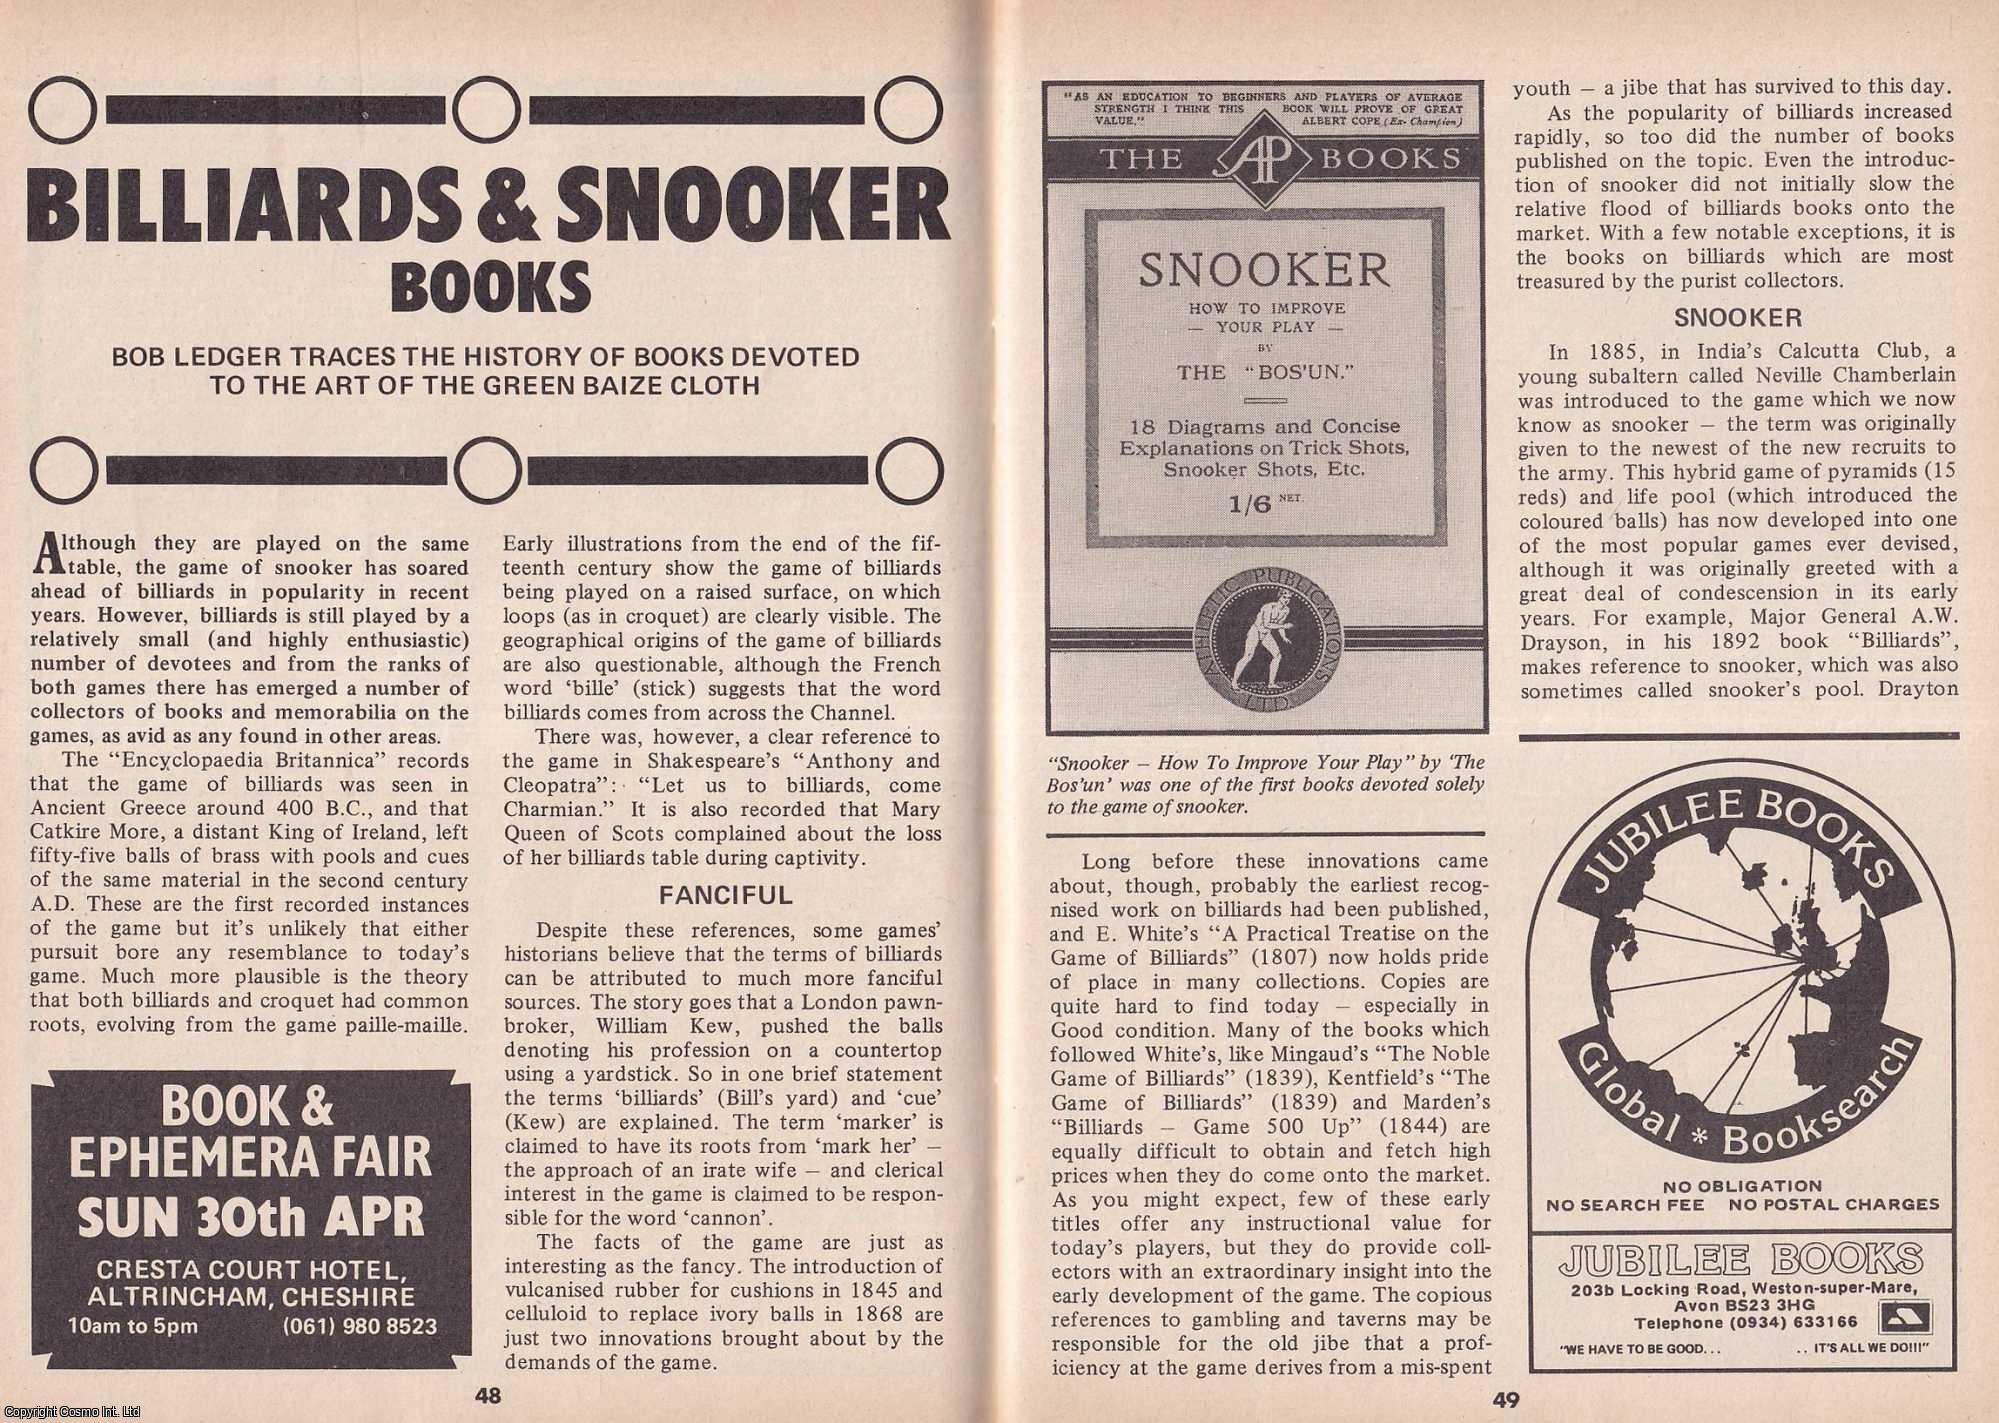 Bob Ledger - Billiards & Snooker Books. Tracing The History of Books Devoted to The Art of The Green Baize Cloth. This is an original article separated from an issue of The Book & Magazine Collector publication.